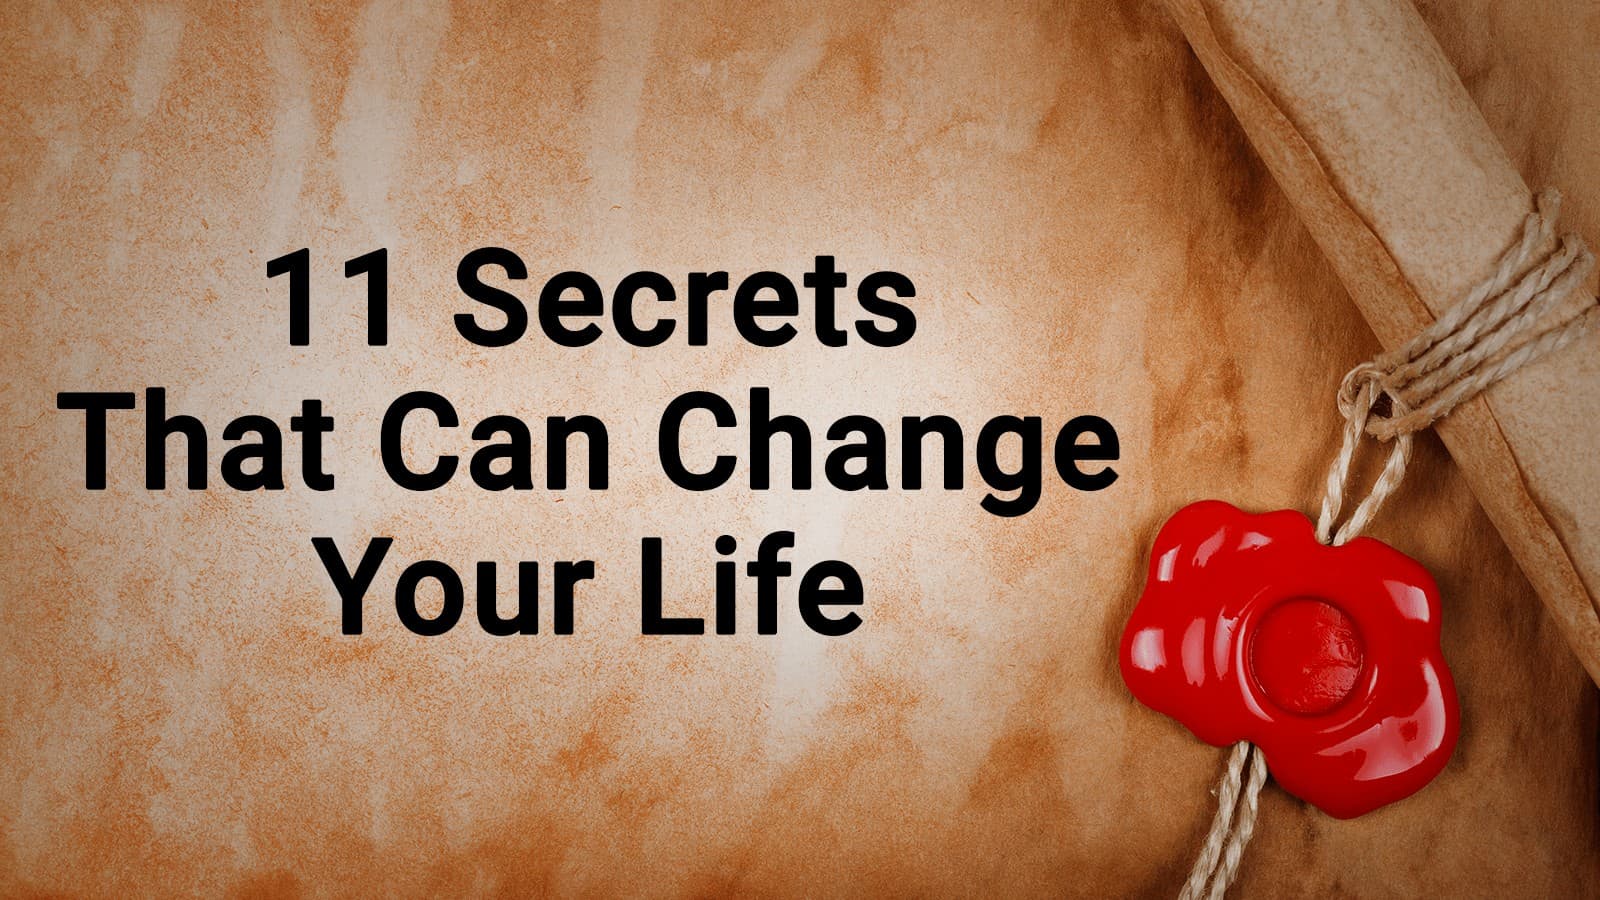 11 Secrets That Can Change Your Life